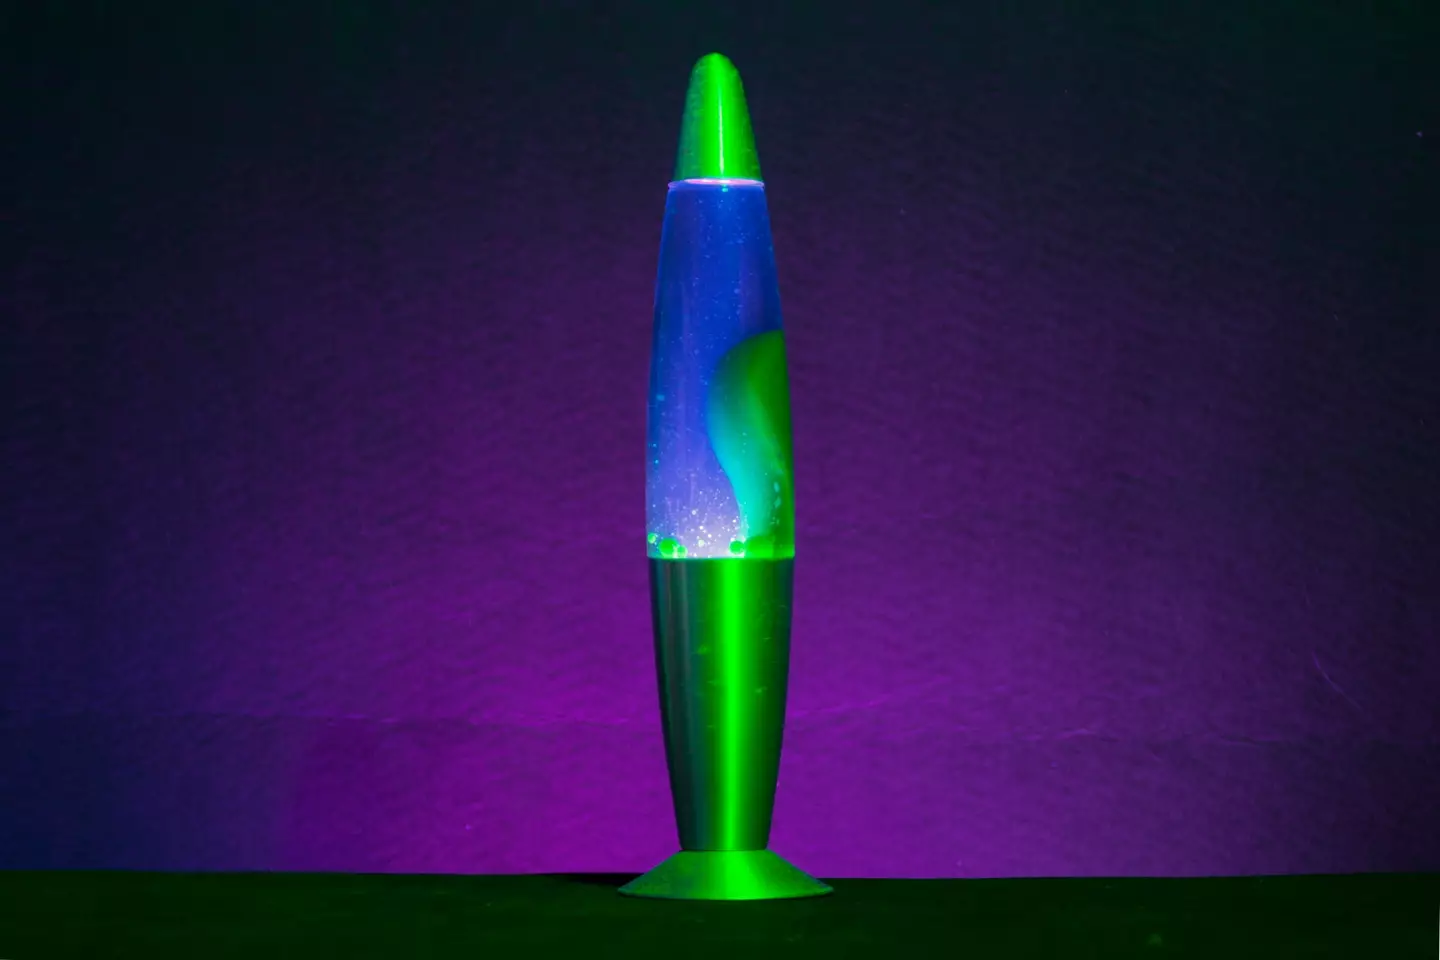 In the throes of alcohol withdrawal symptoms, he drank the contents of a lava lamp.